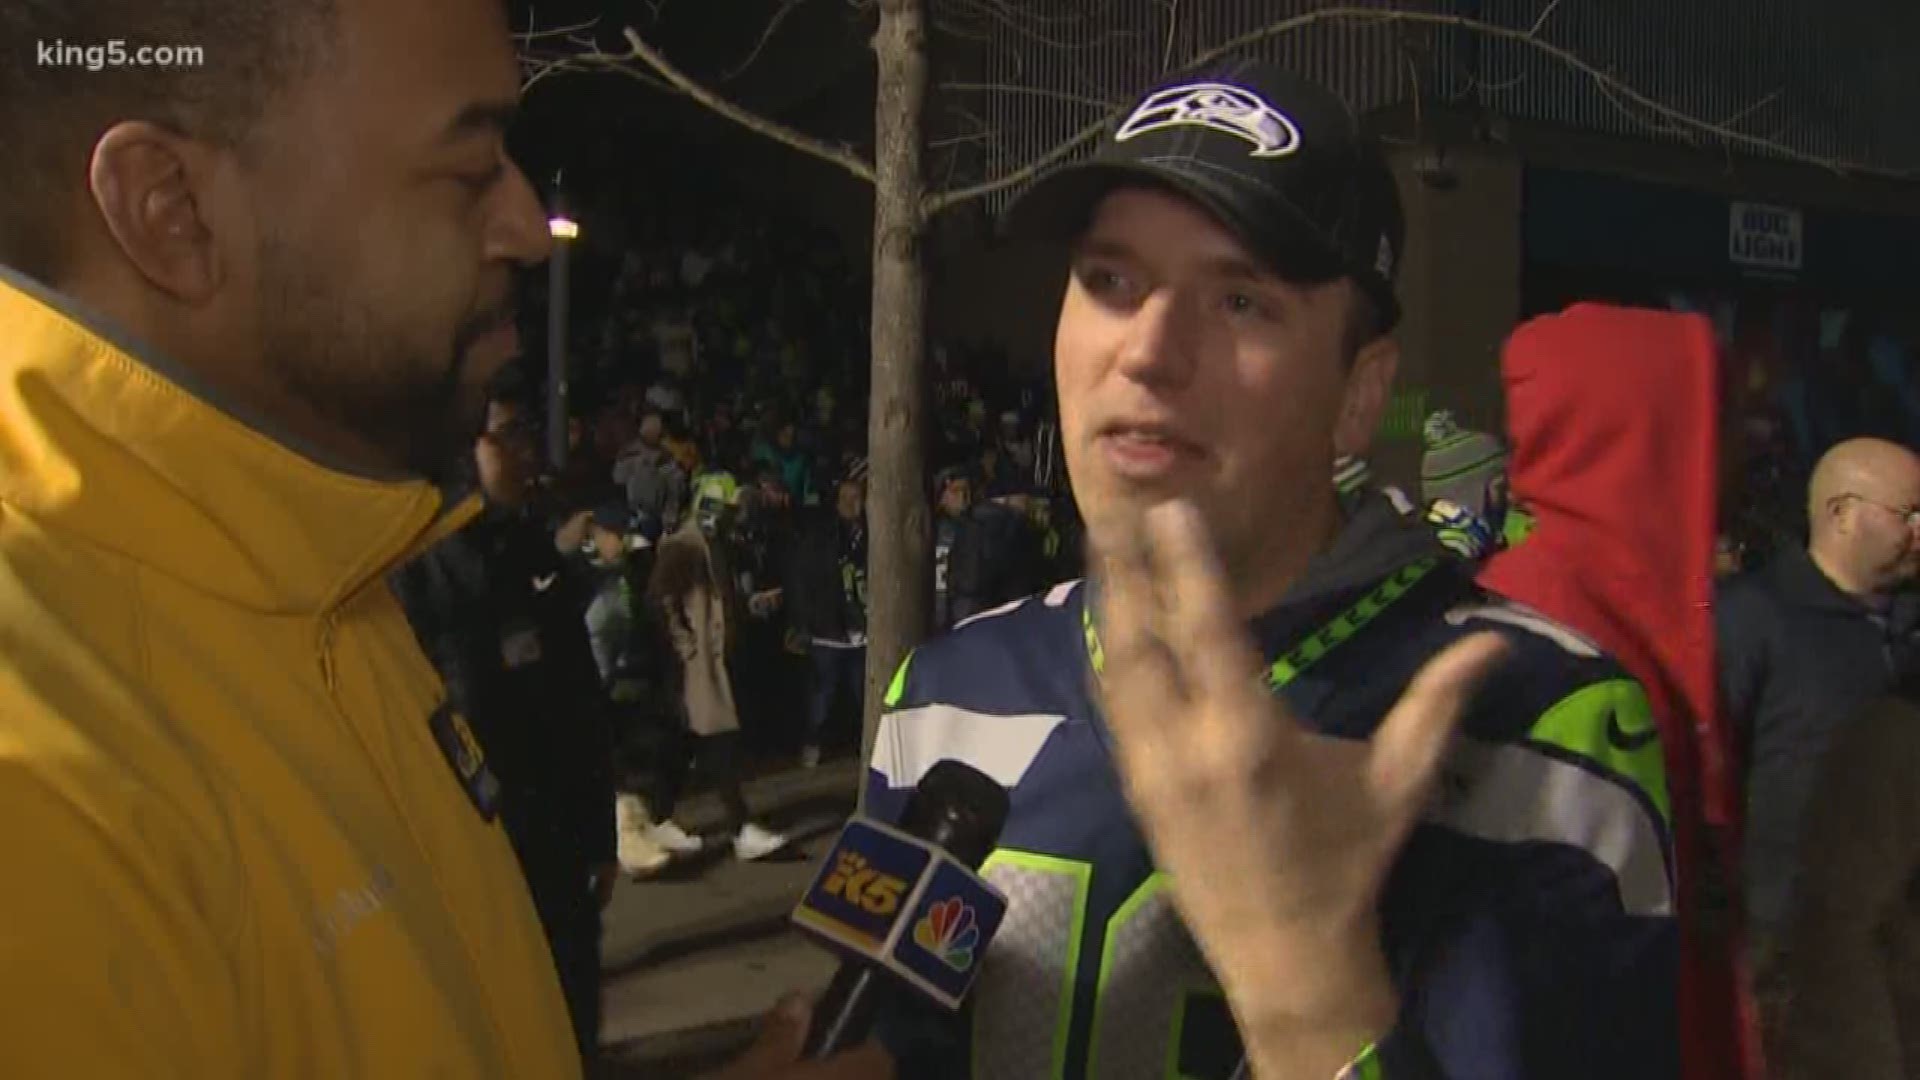 Seattle Seahawks fans talk about Sunday night's 26-21 loss to the San Francisco 49ers. KING 5's Tony Black reports.